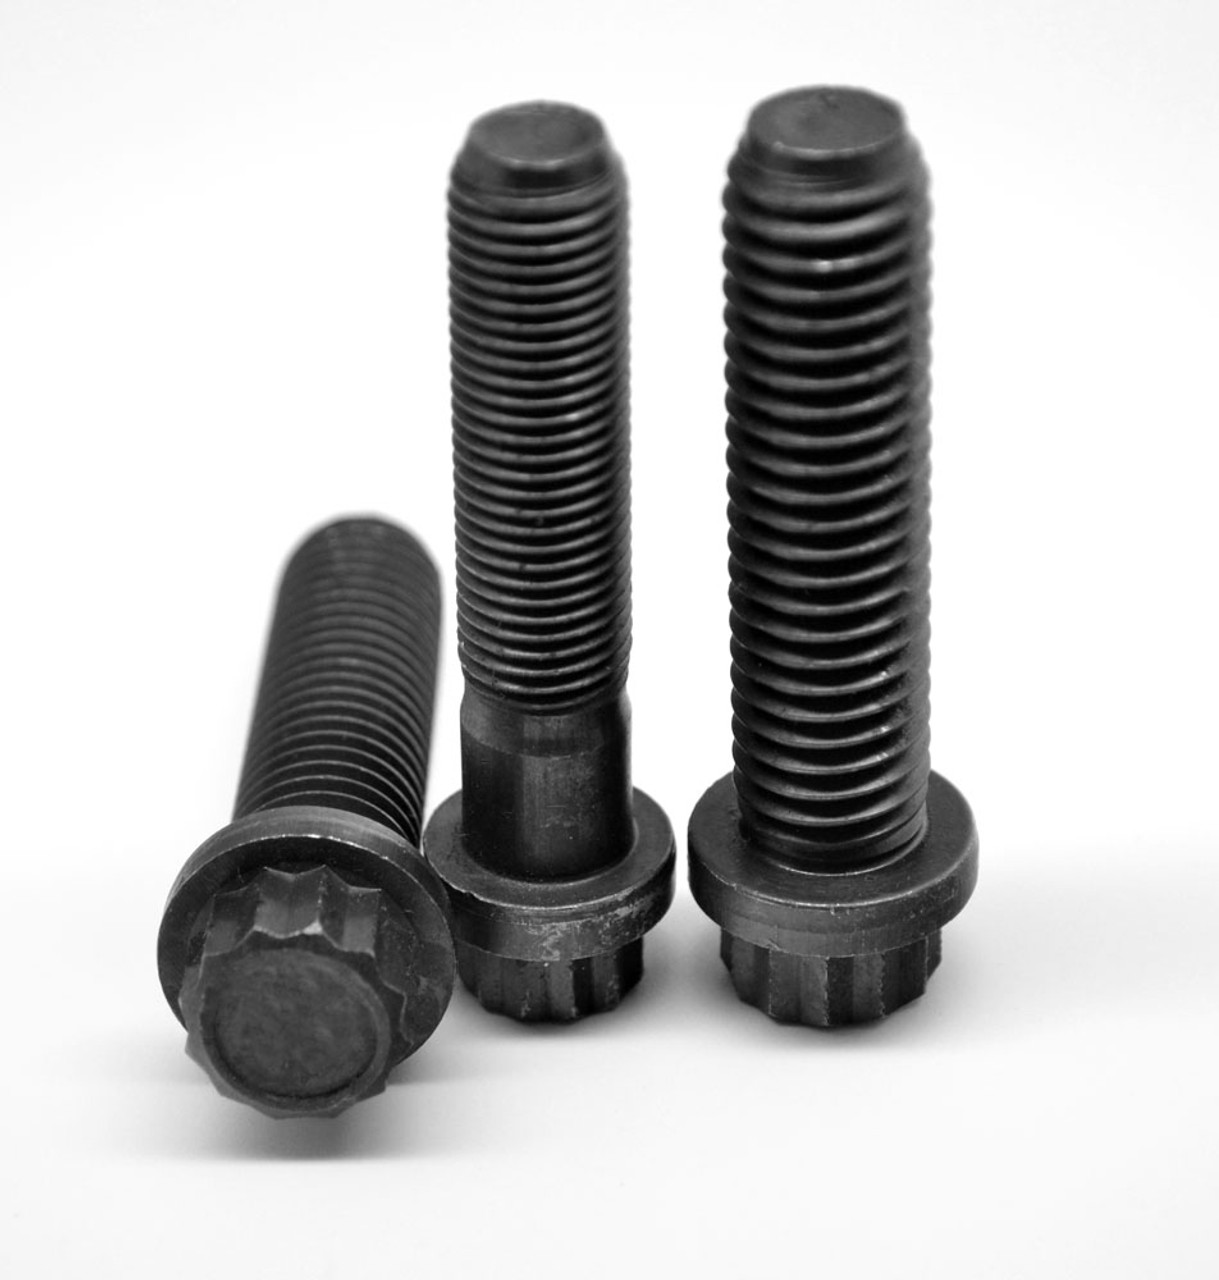 5/8-11 x 1 1/4 Coarse Thread 12-Point Flange Screw Alloy Steel Thermal Black Oxide